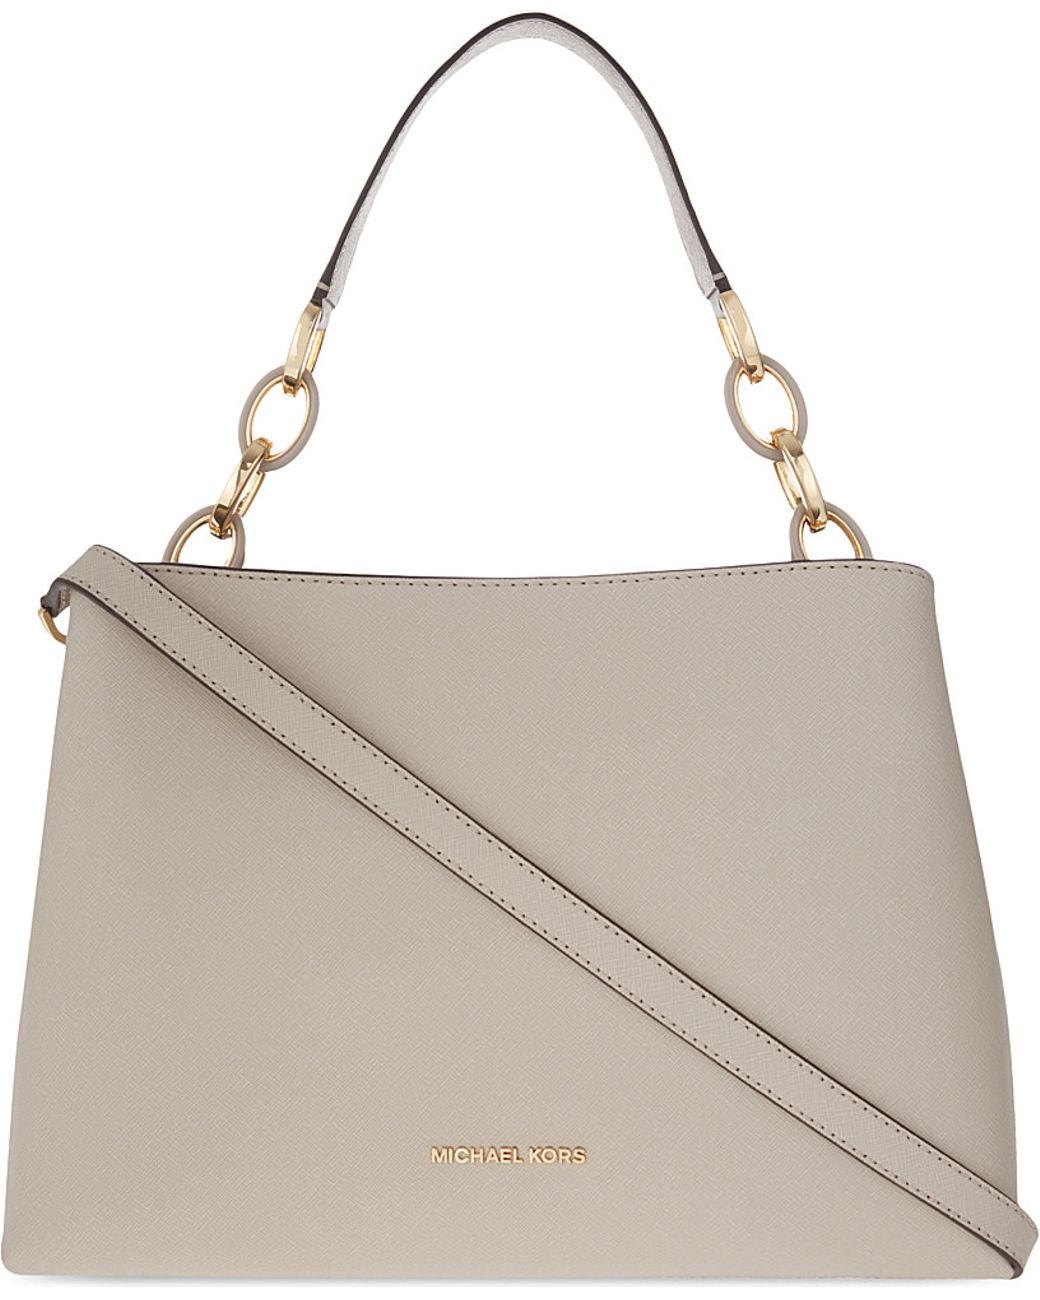 MICHAEL Michael Kors Portia Large Saffiano Leather Shoulder Bag in Gray |  Lyst